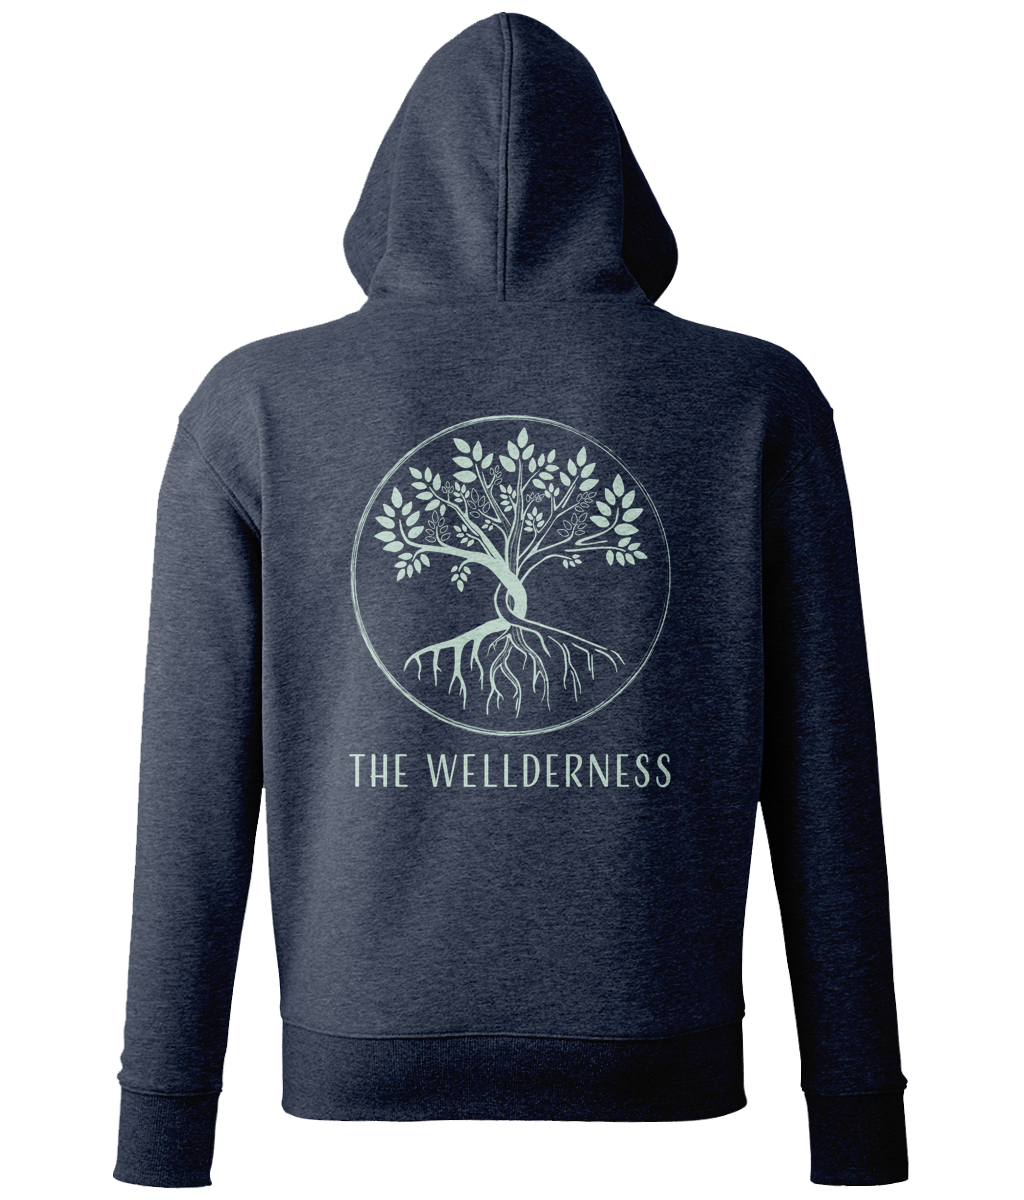 Wellderness Hoodie - Navy with Green Print